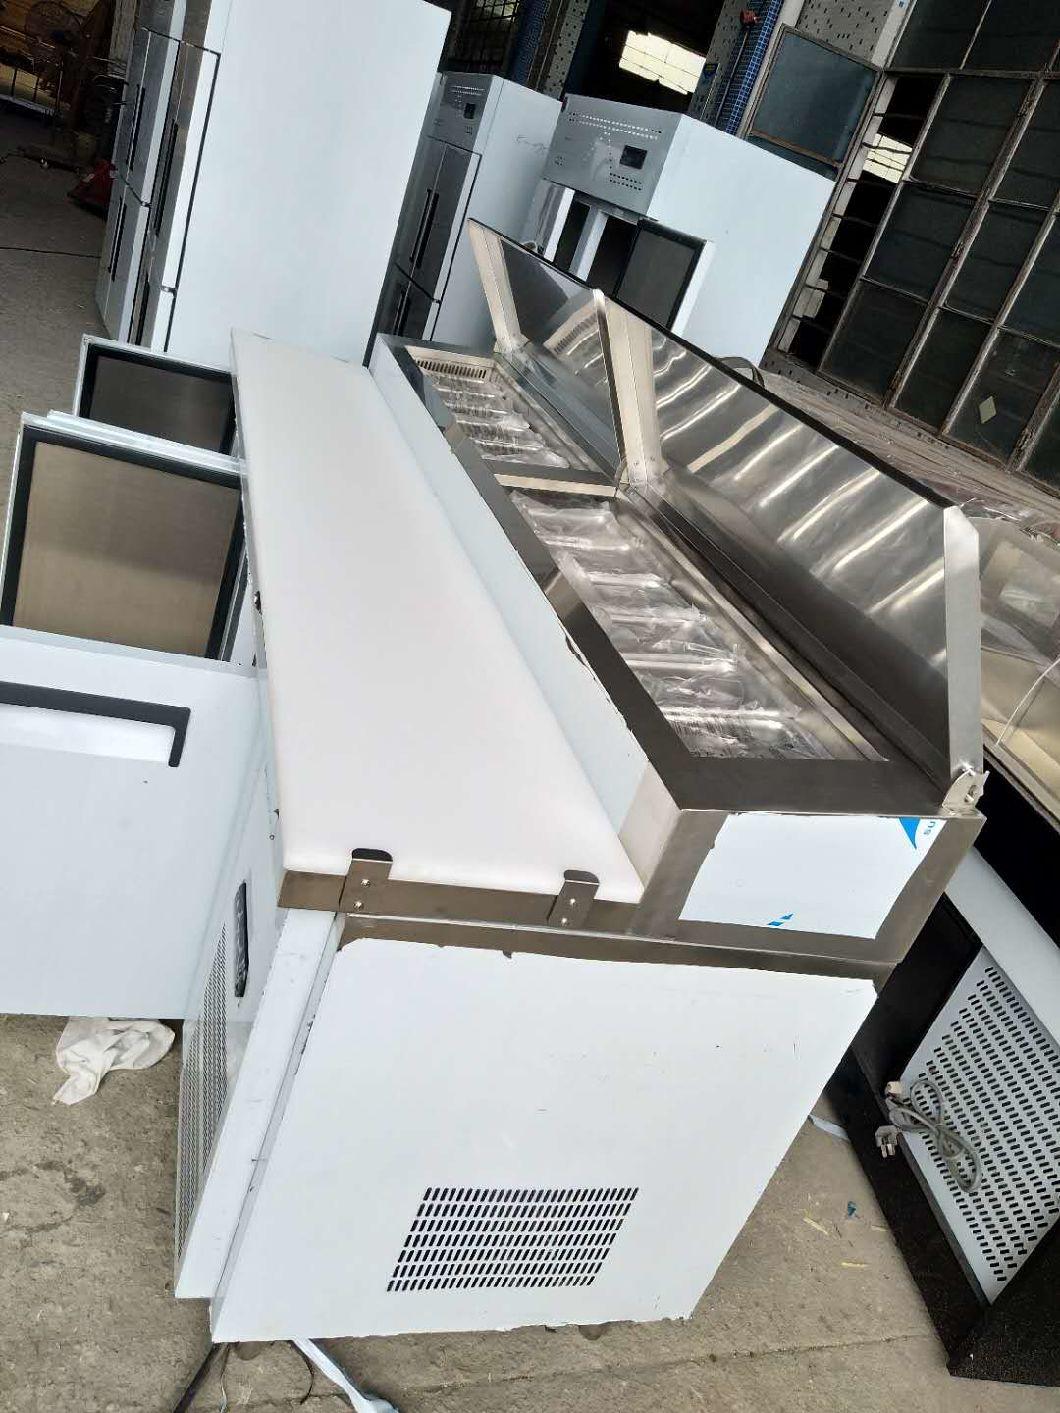 Commercial Counter Top Refrigerated Salad Bar / Pre Table Refrigerated Counter in Australia